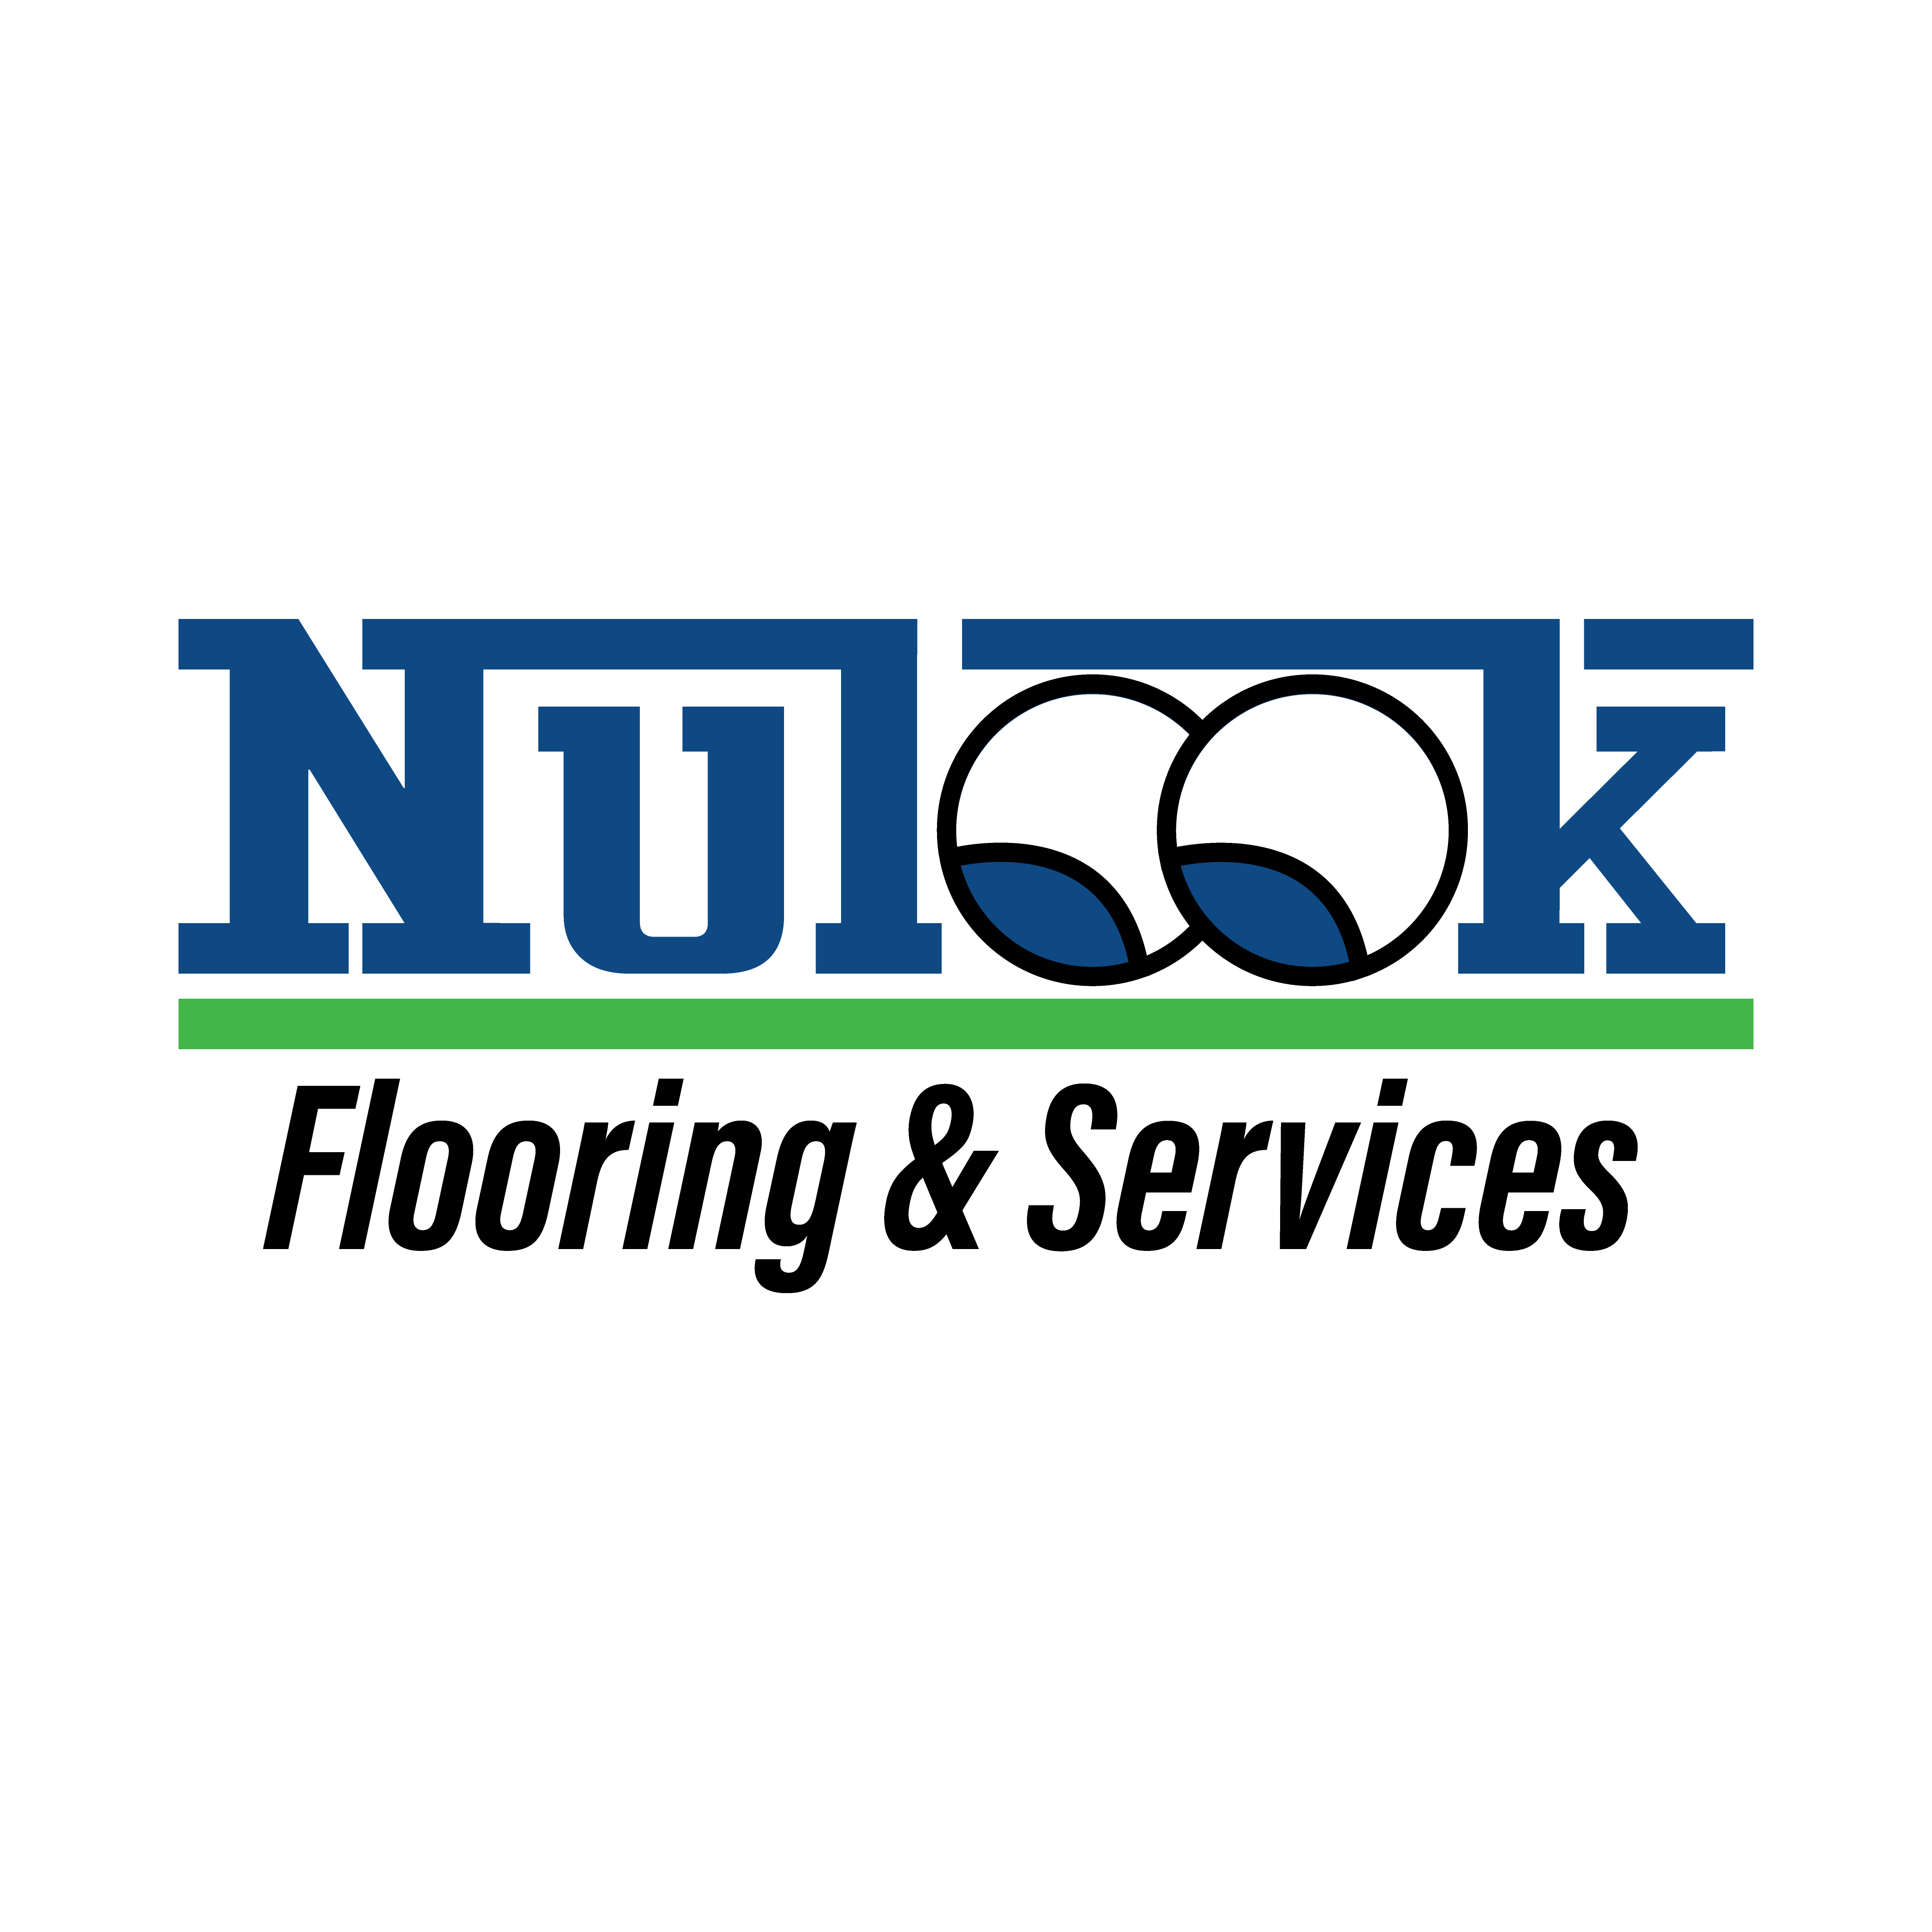 Nulook Flooring And Services Inc's logo